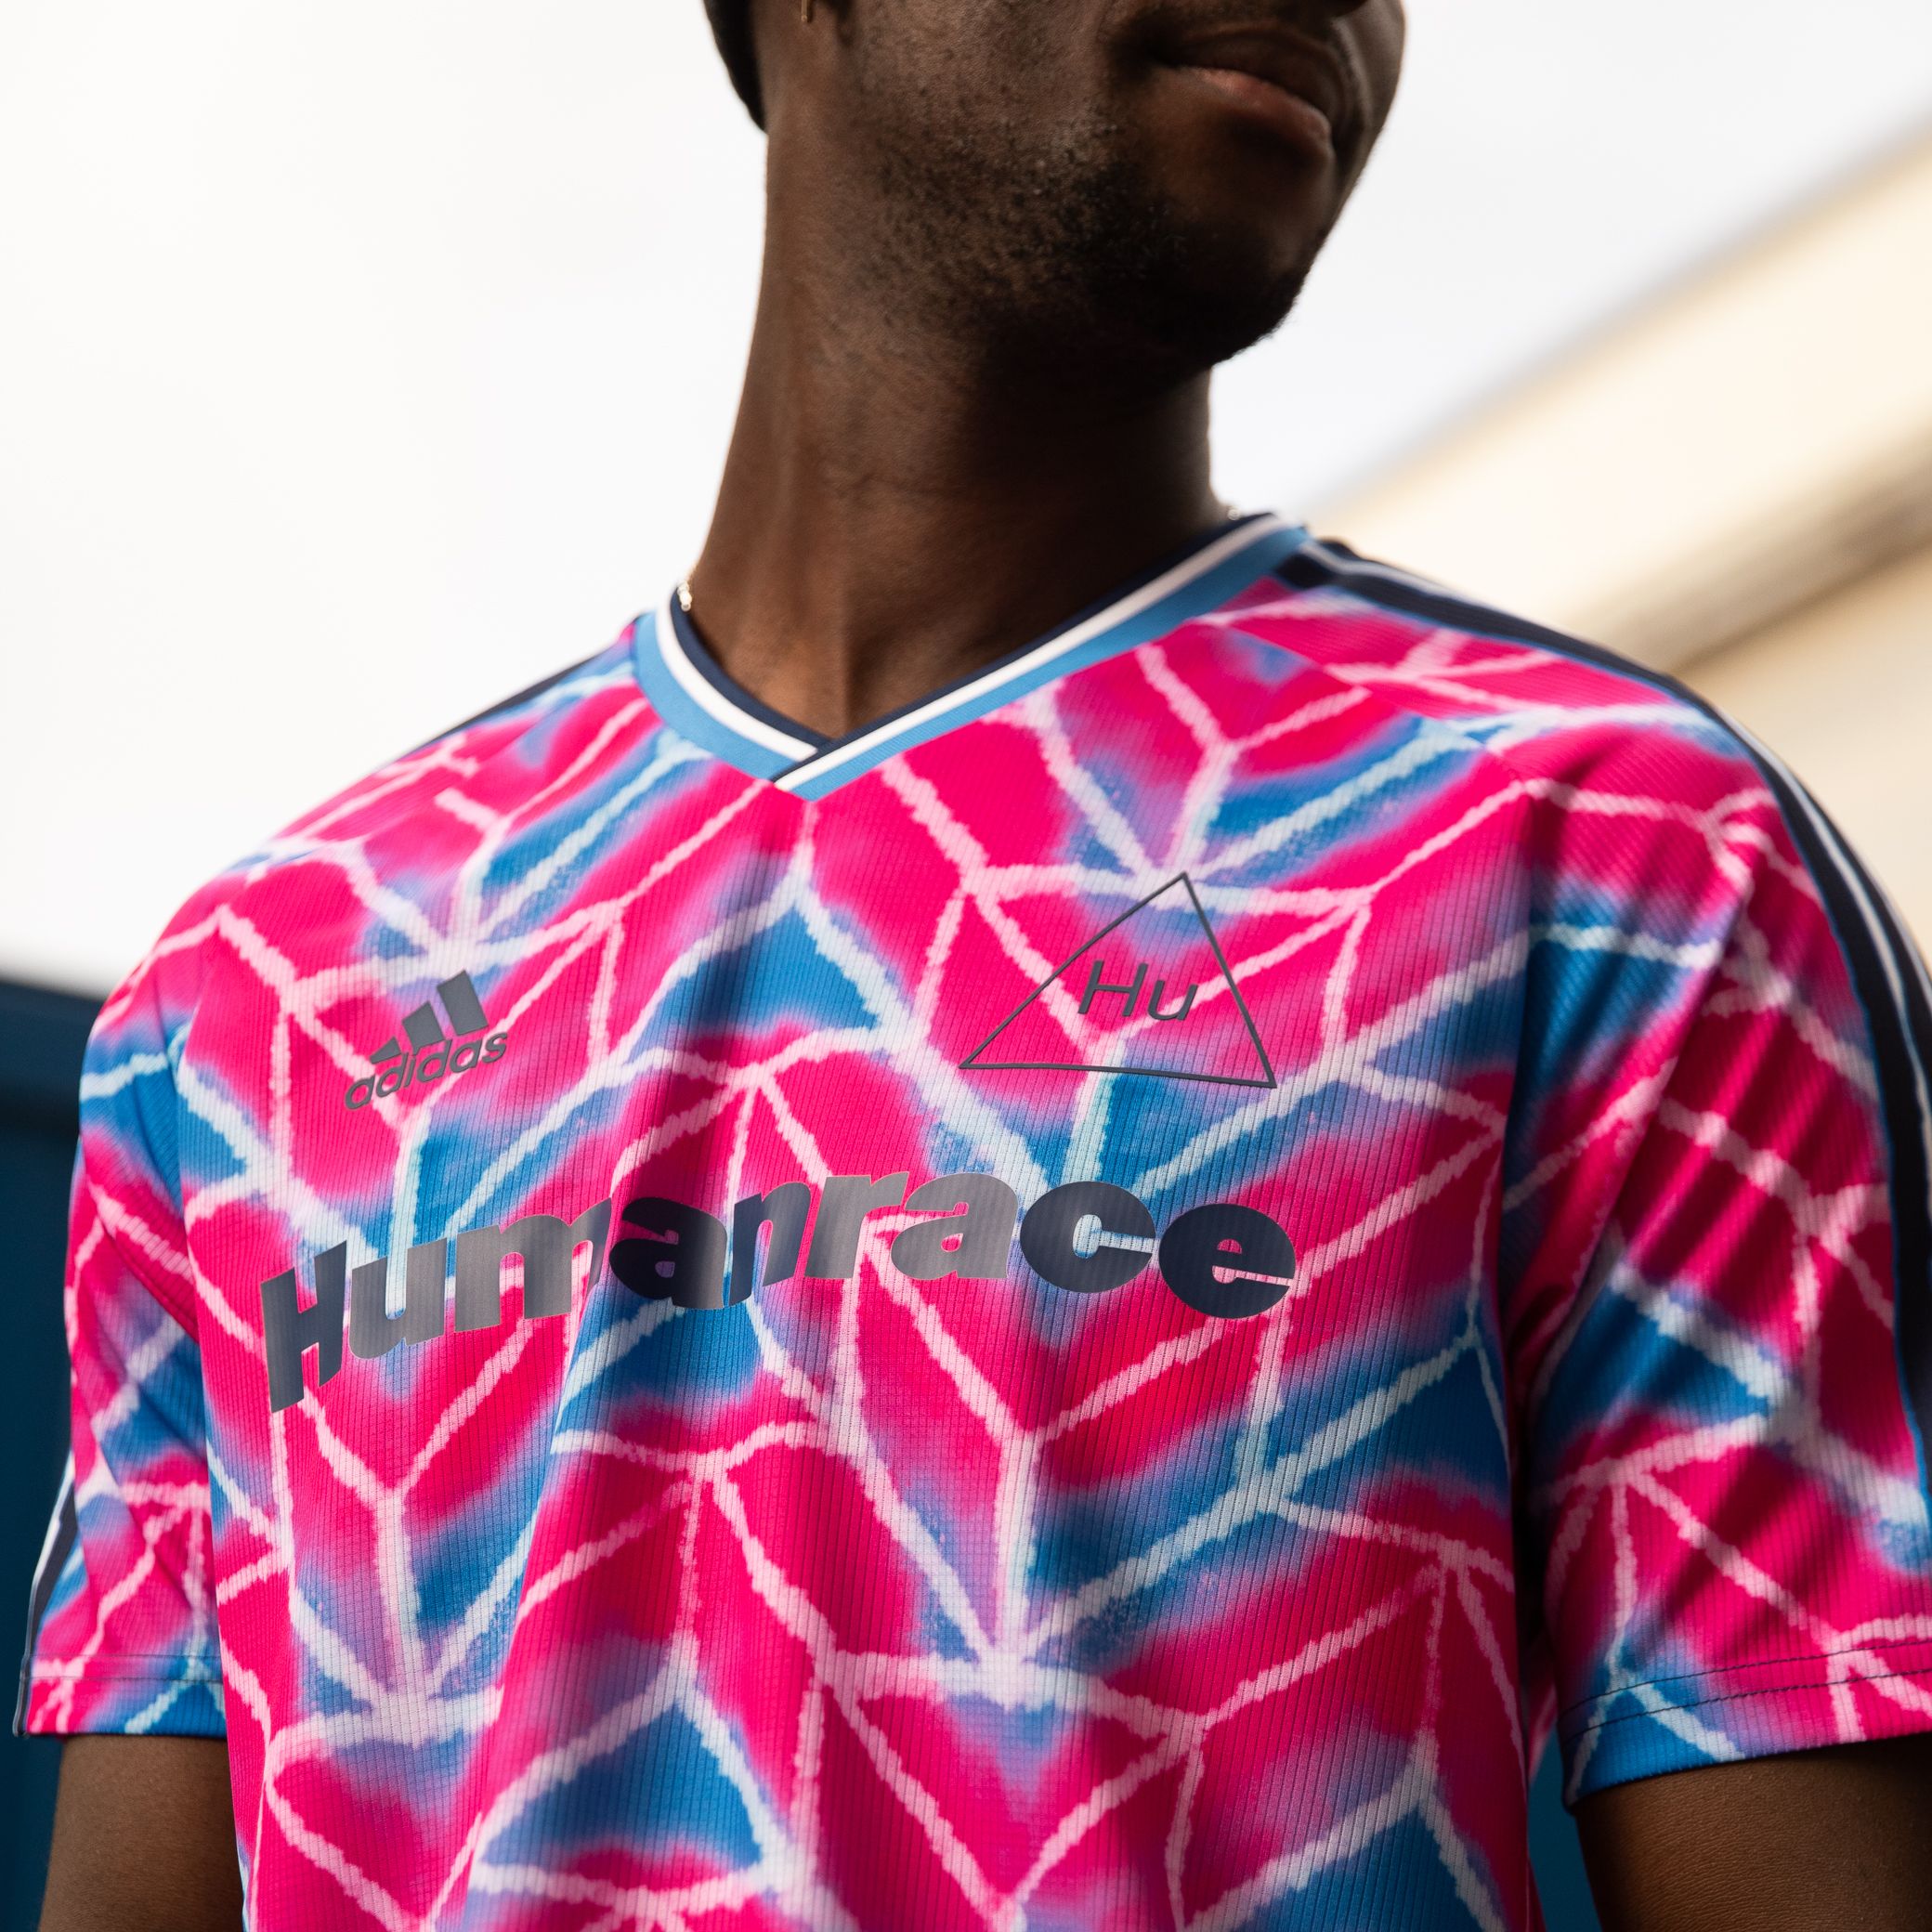 Titolo on X: "NOWavailable💫 Human Race x Adidas HUFC Jersey "Real  Magenta/True Blue" available online. ▻ https://t.co/yRHYsCczEF ⁠ small to  x-large.⁠ 🔎 GK5179⁠ ⁠ Designed by hand for the Human Race. A